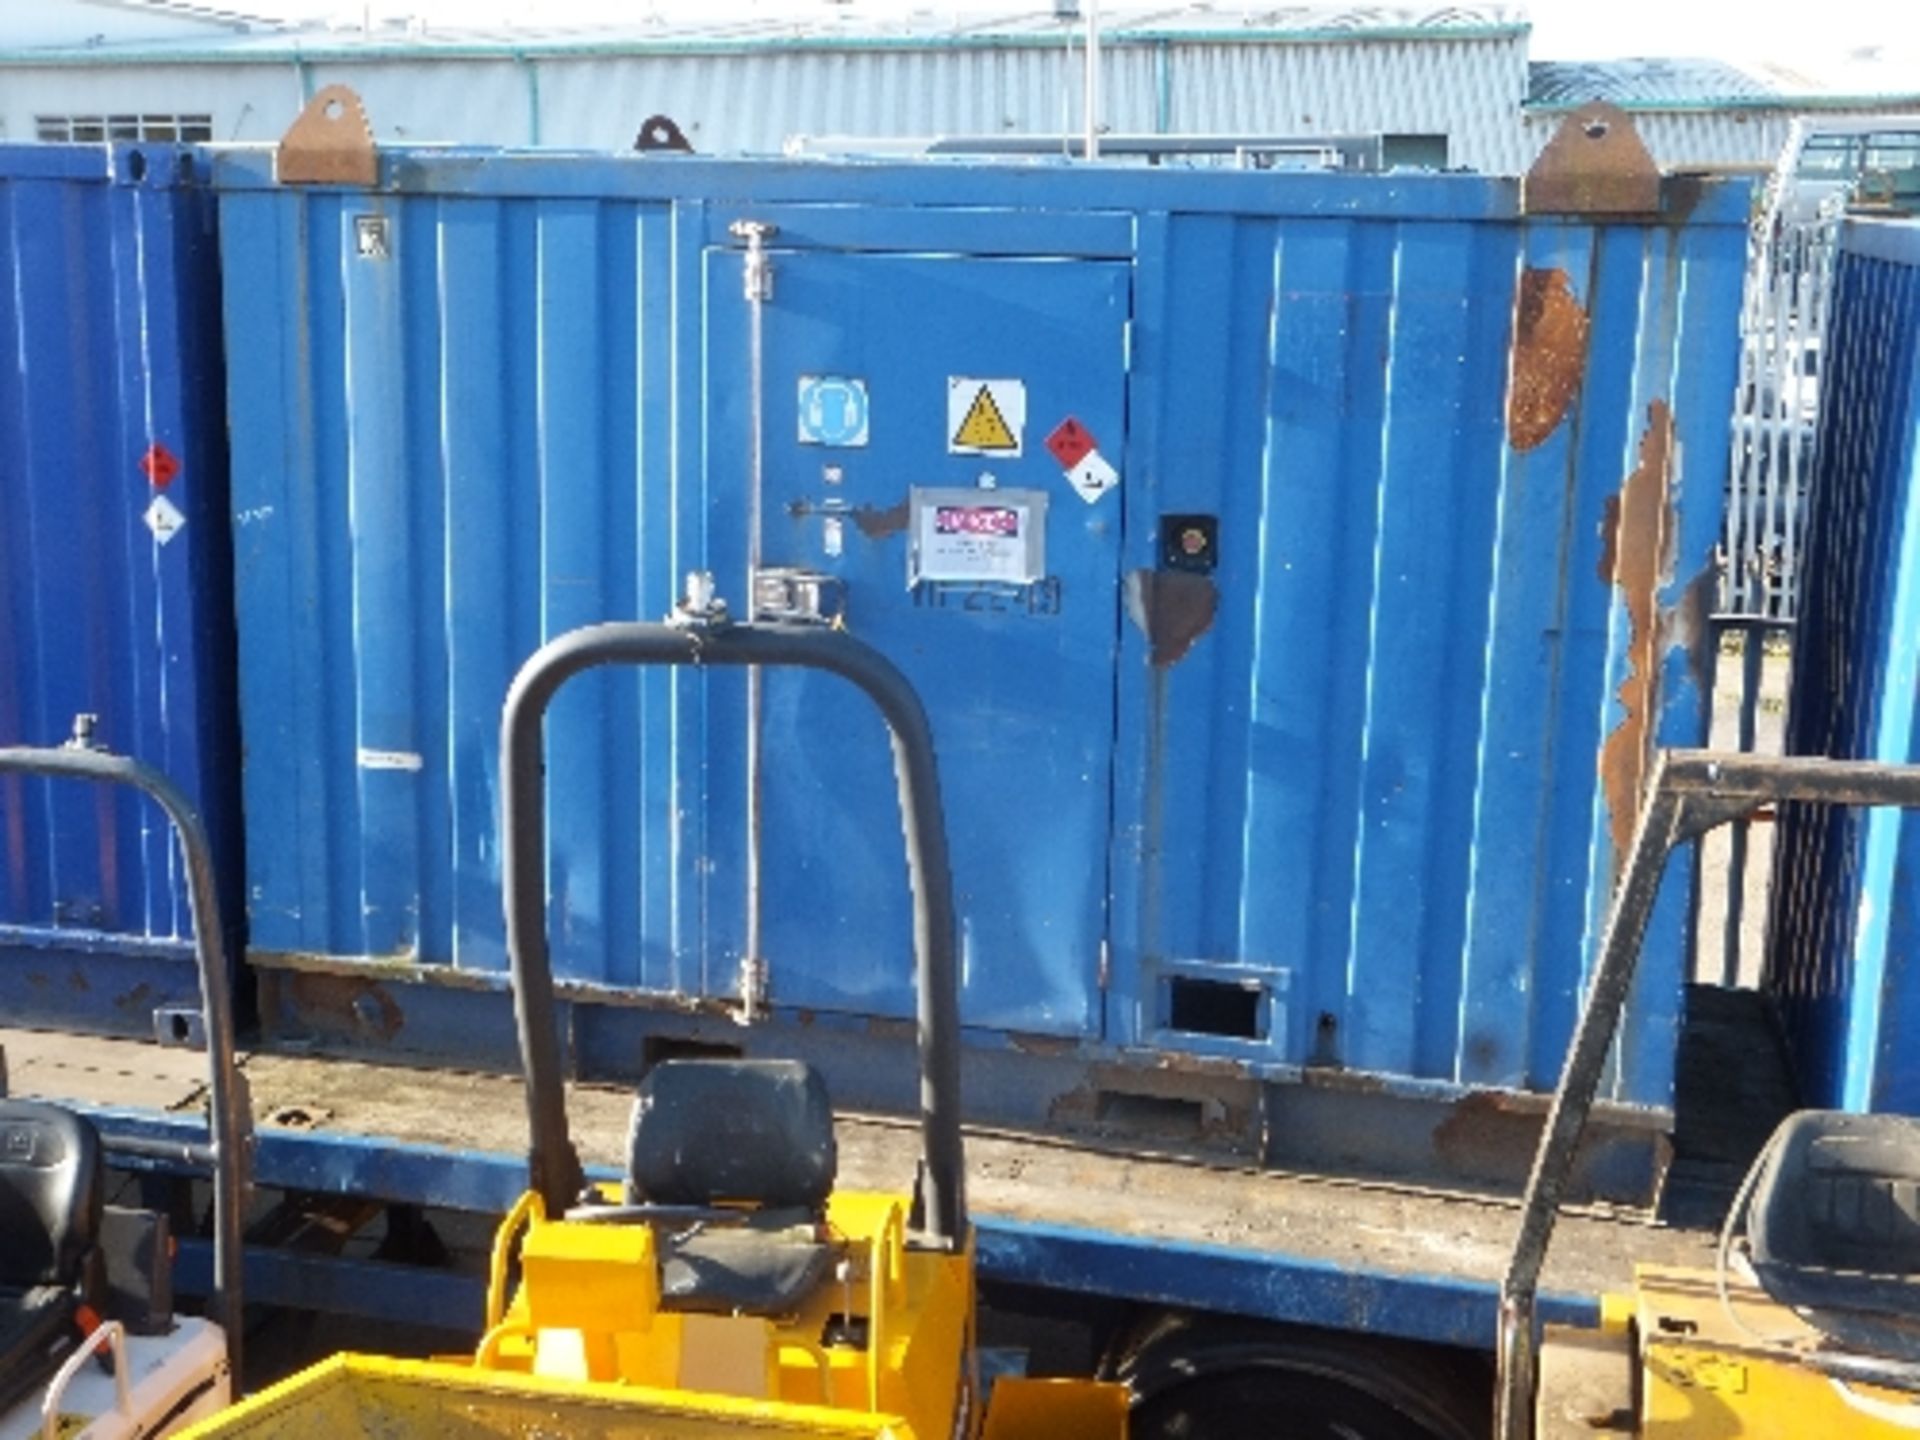 FG Wilson 45kva generator in secure unit 19,059 hrs   This lot is sold on instruction of Speedy